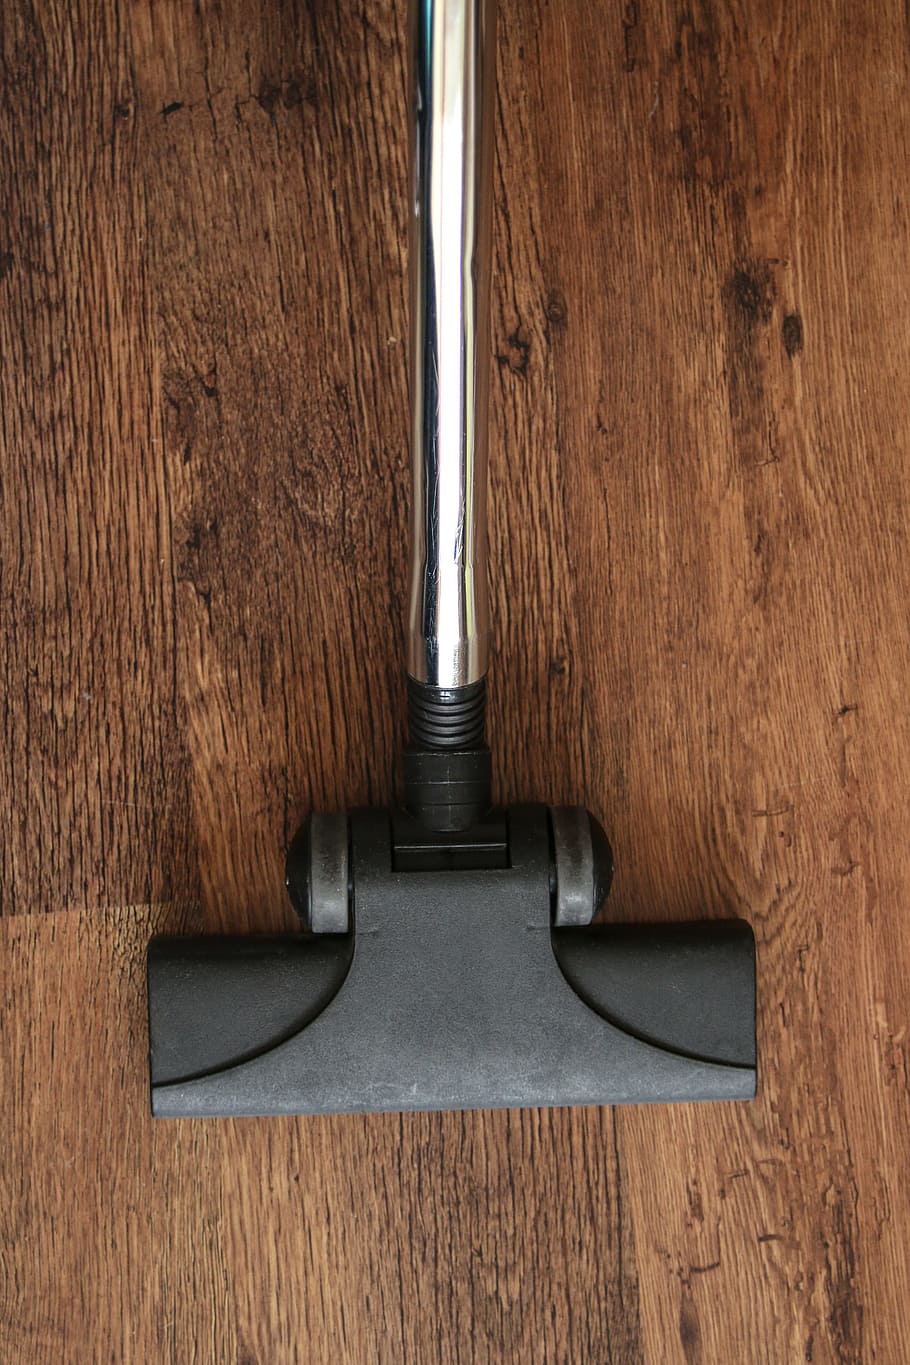 black, stick, vacuum, cleaner, Vacuum Cleaner, Vacuuming, Cleaning, washing, cleanup, wood - Material